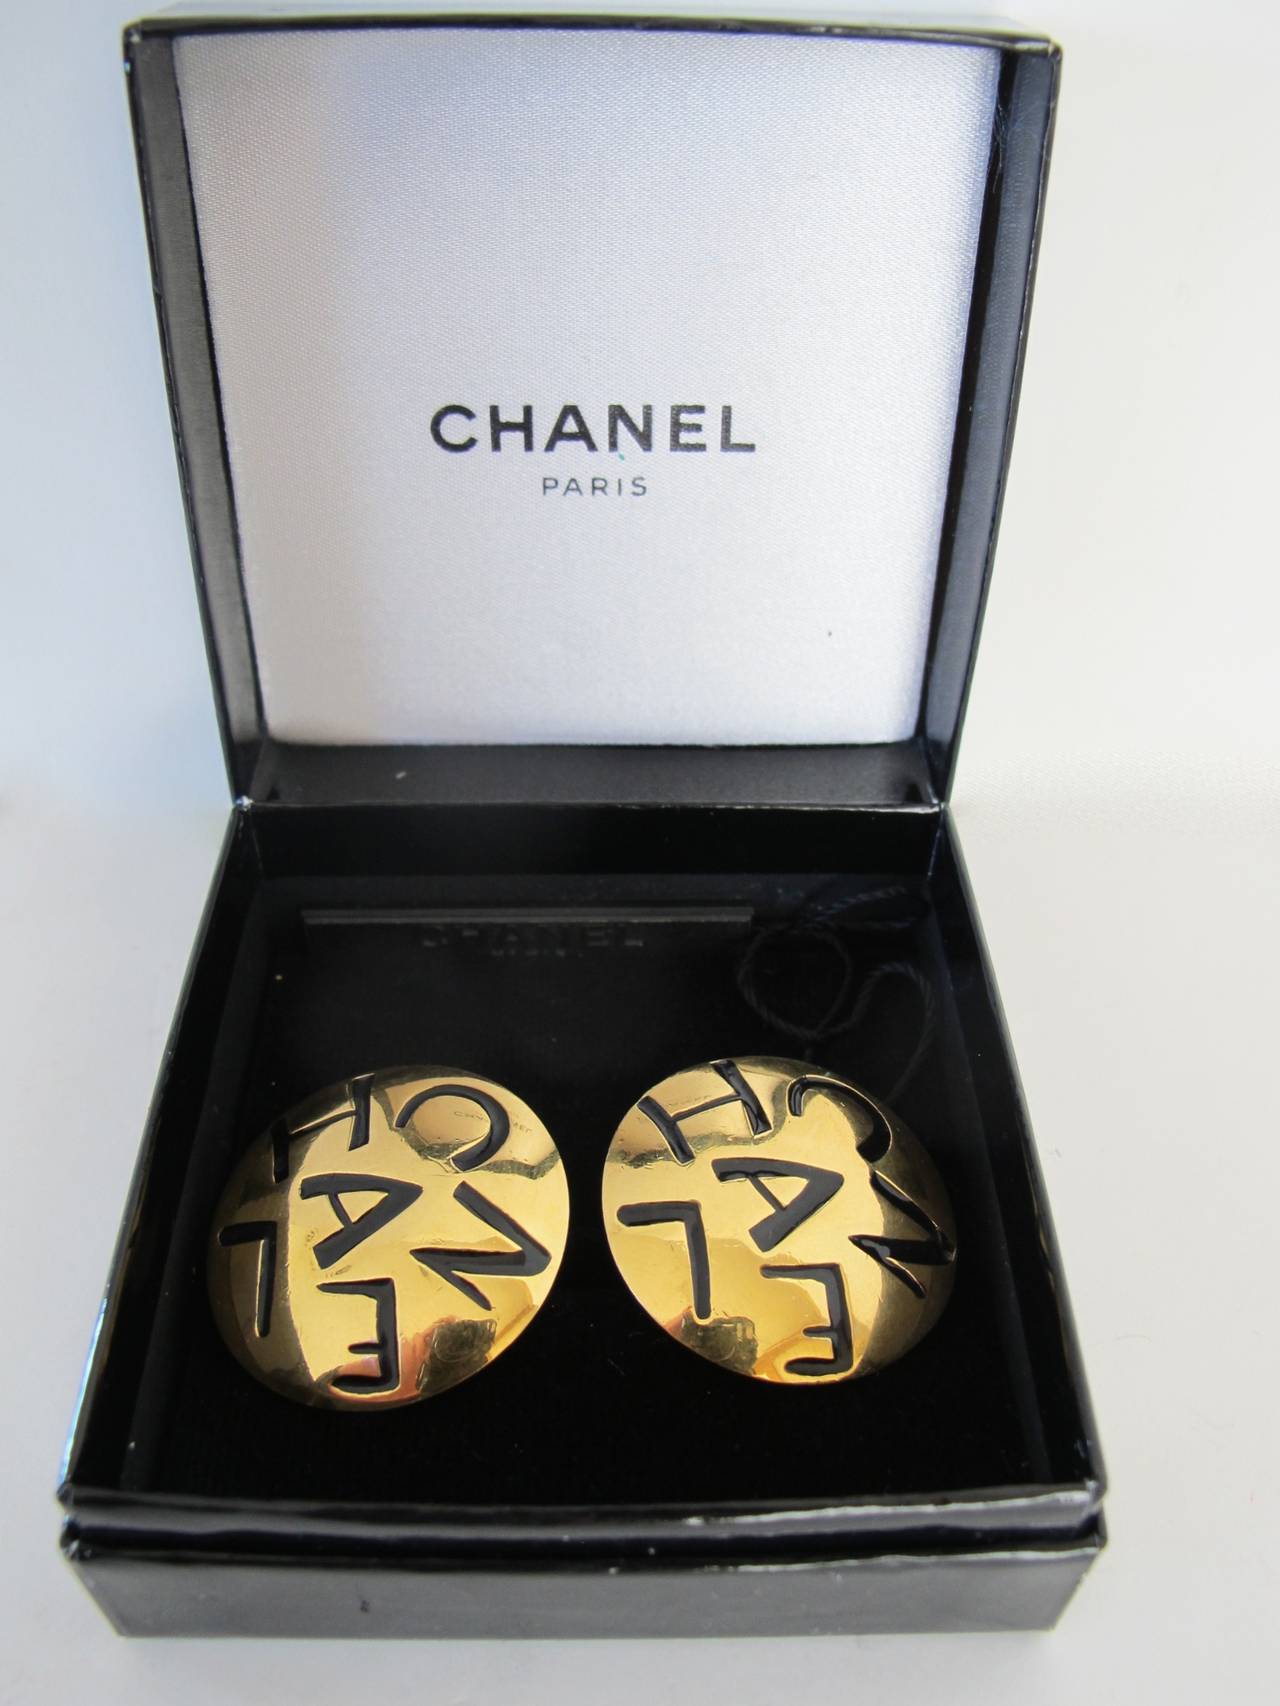 Chic pair of 1970's Chanel earrings featuring Chanel letters. The earrings come with the original box and Chanel tag.